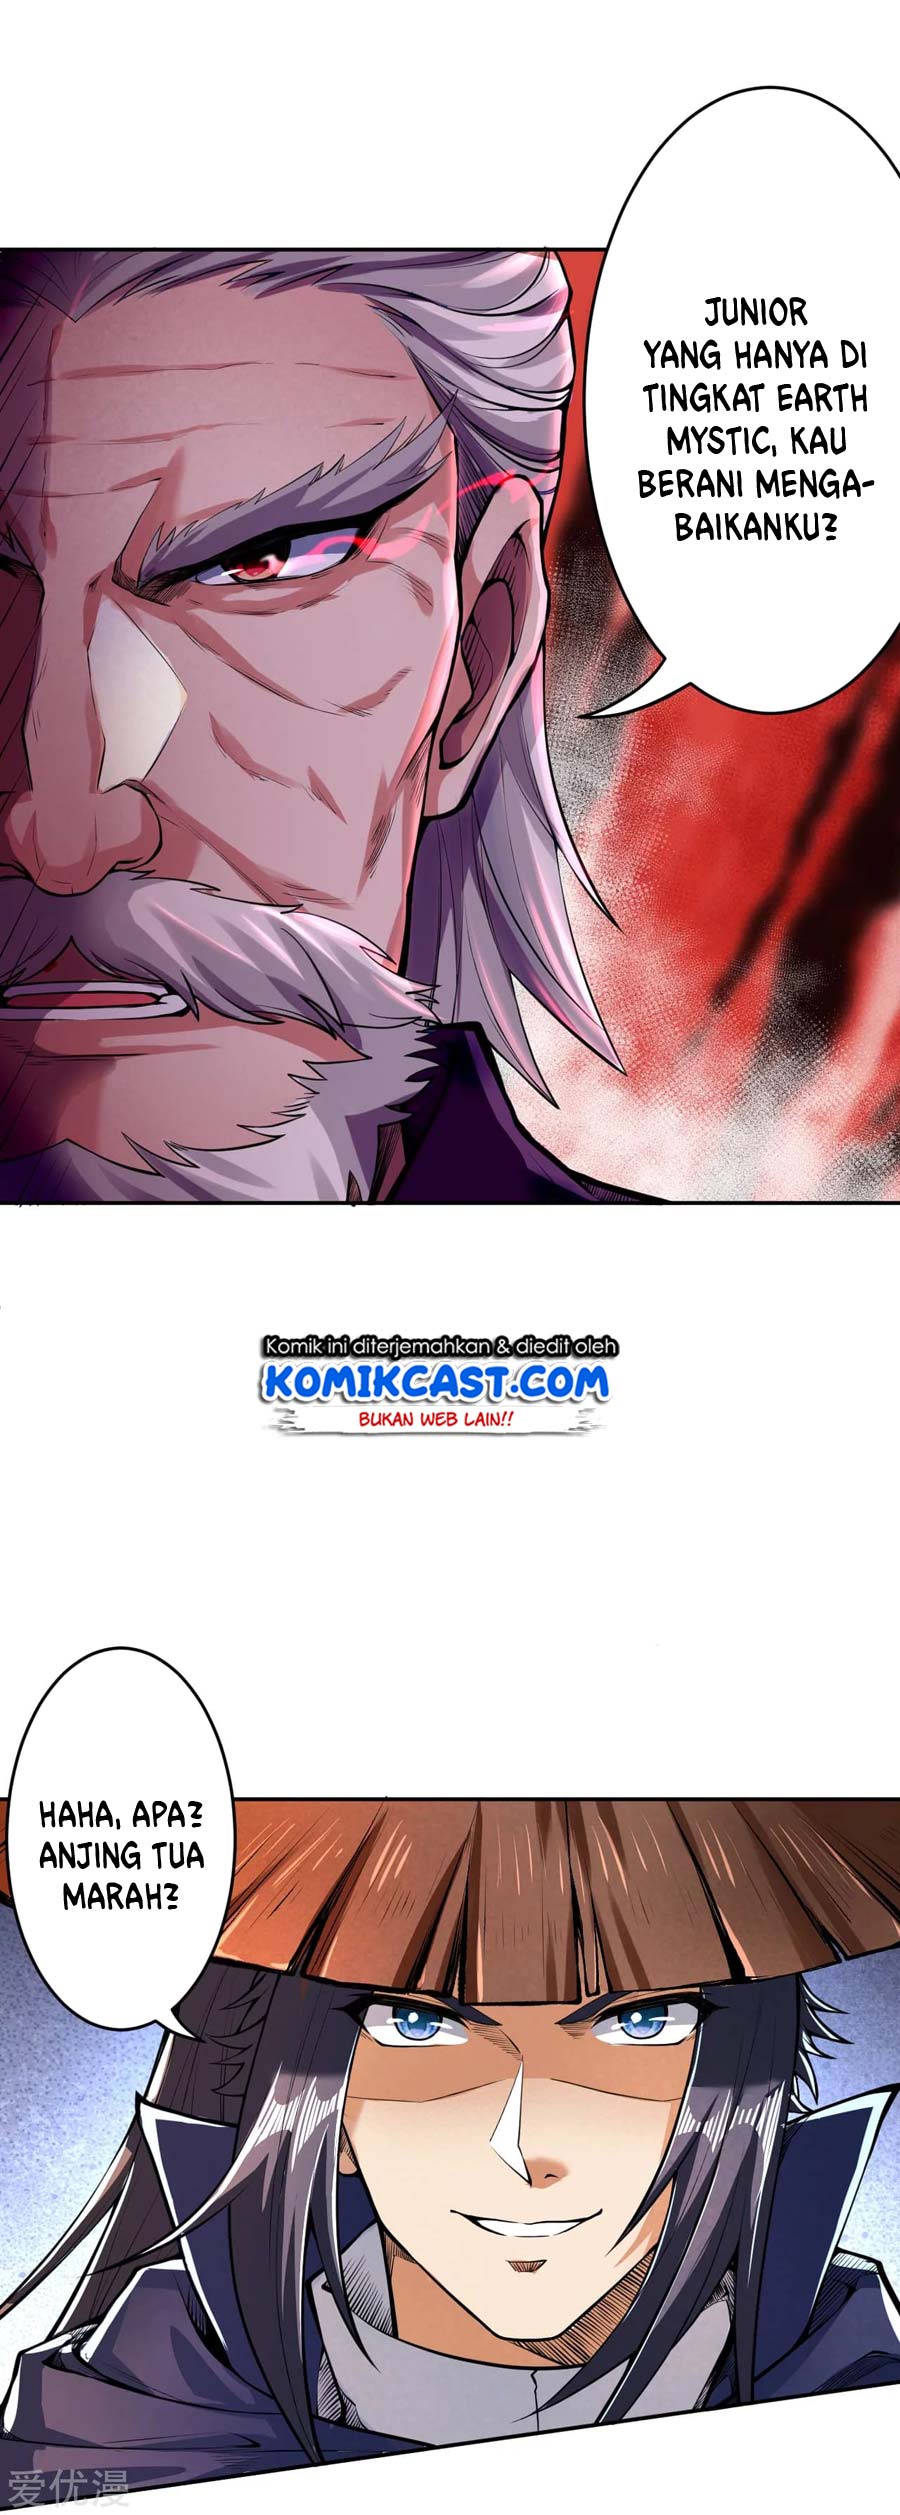 Against the Gods Chapter 222